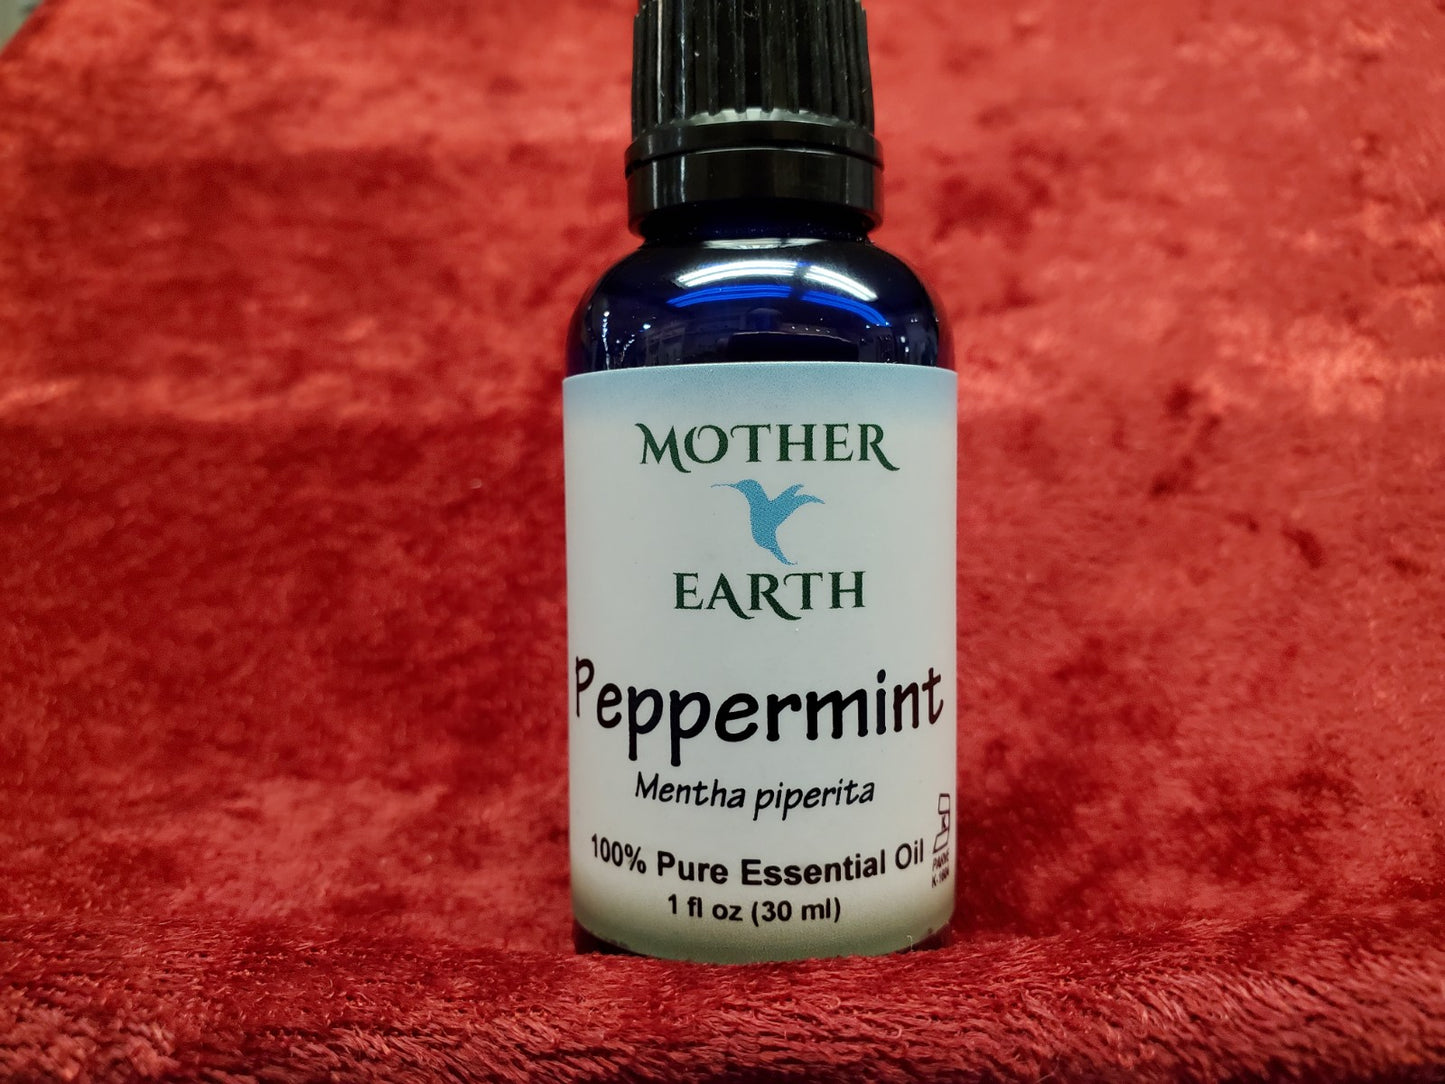 Mother Earth Peppermint